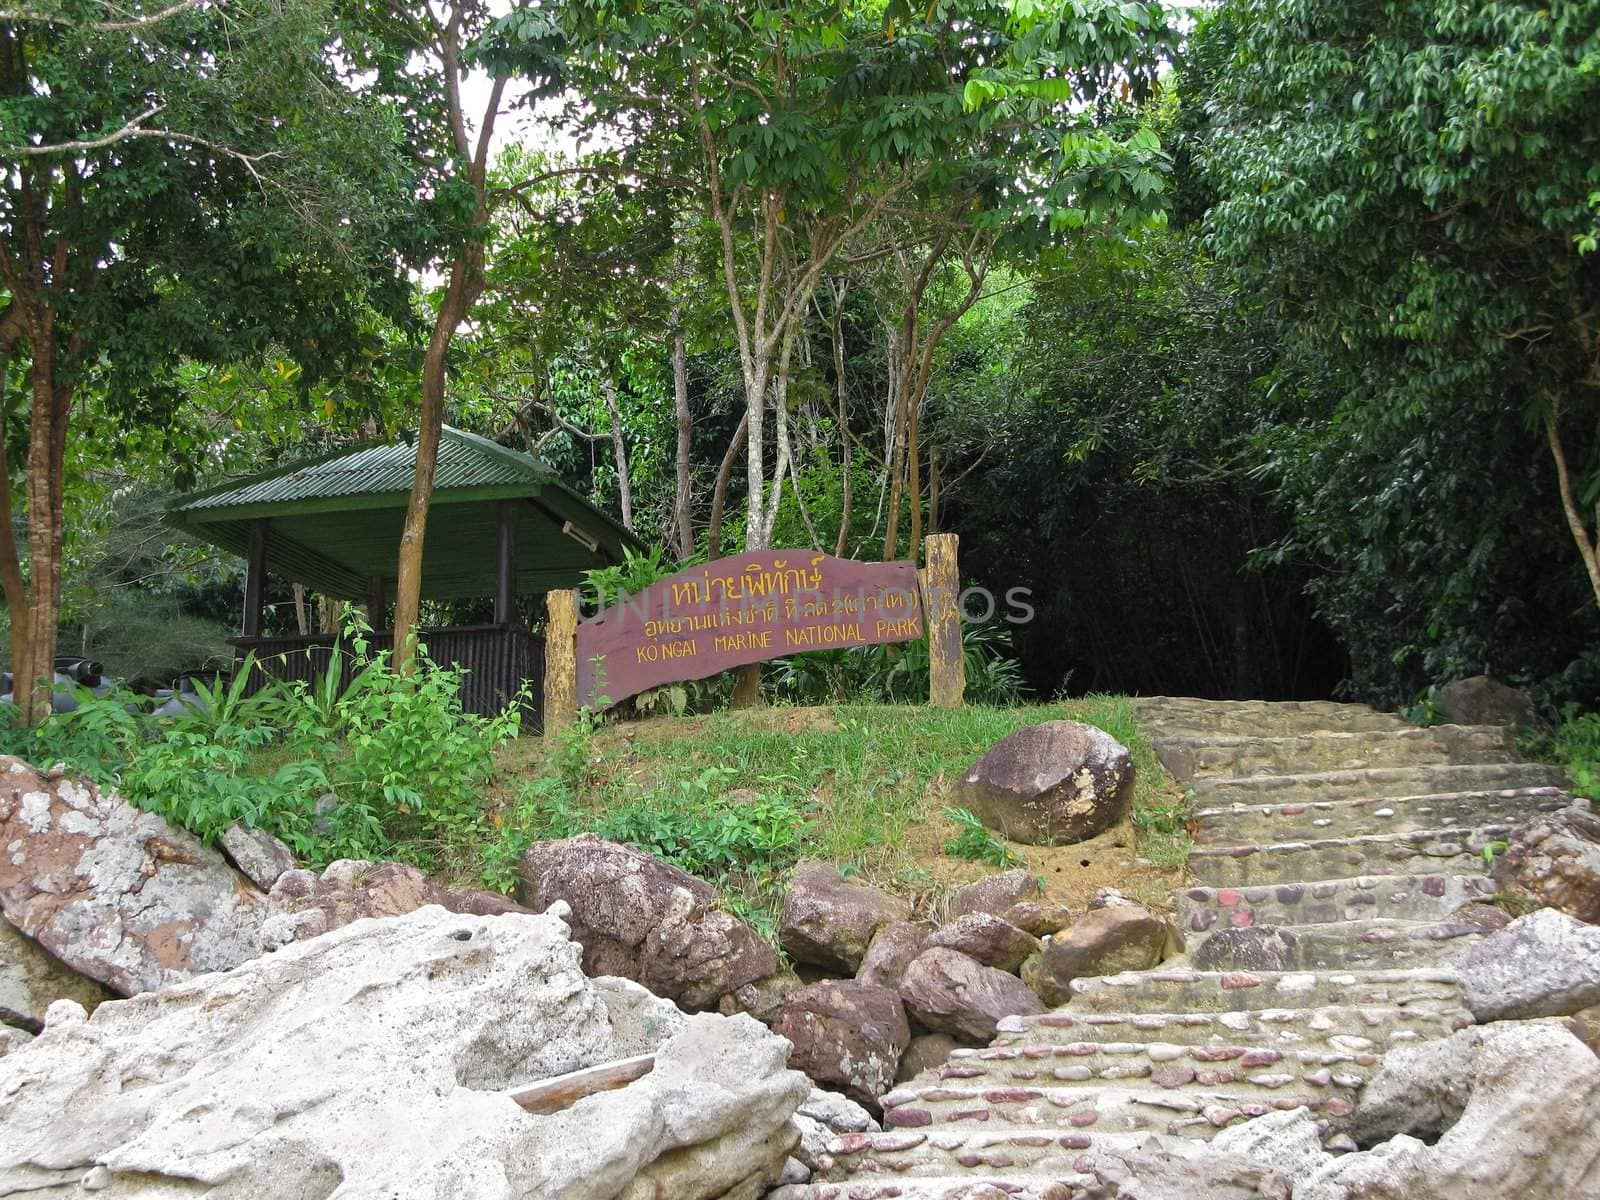 The entrance of Ko Ngai Marine National Park at the island Ko Ngai, located in the Andaman Sea. Ko Ngai is part of Trang province in Thailand.